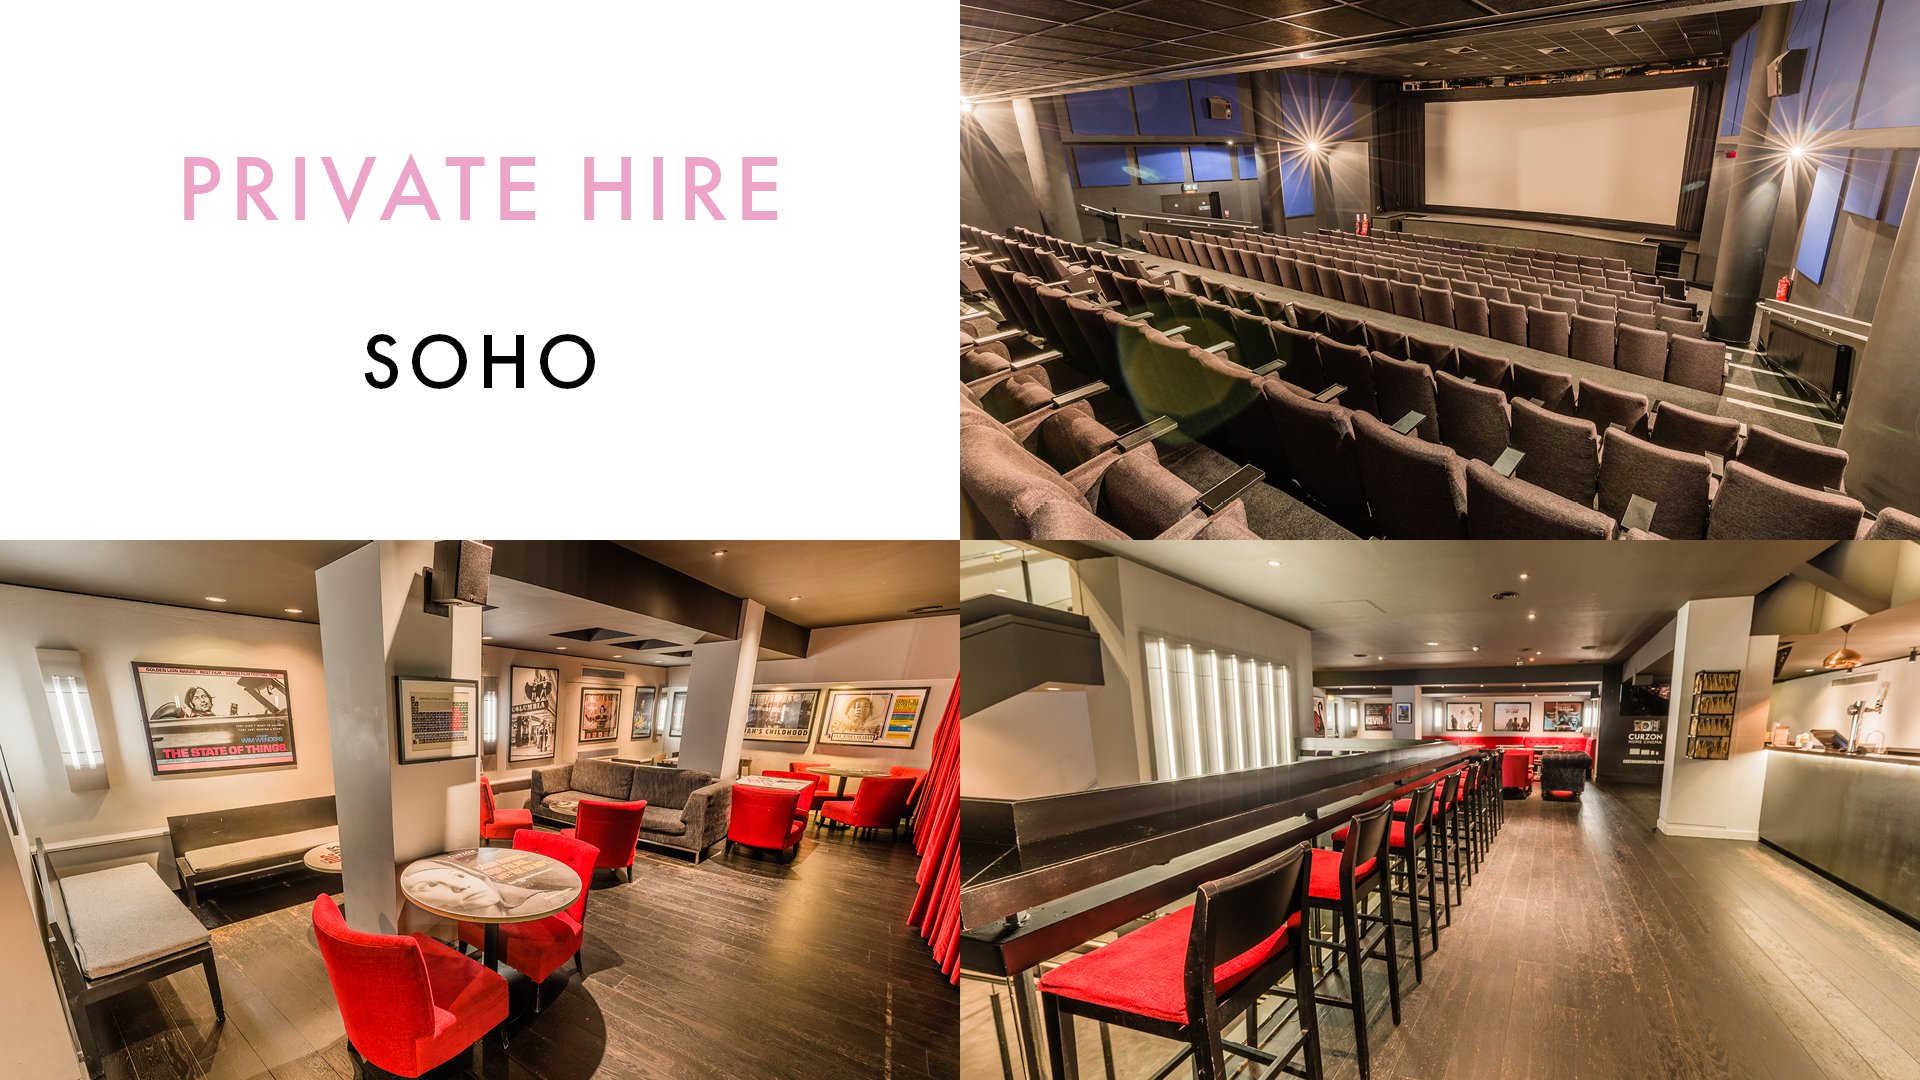 HIRE THIS SPACE